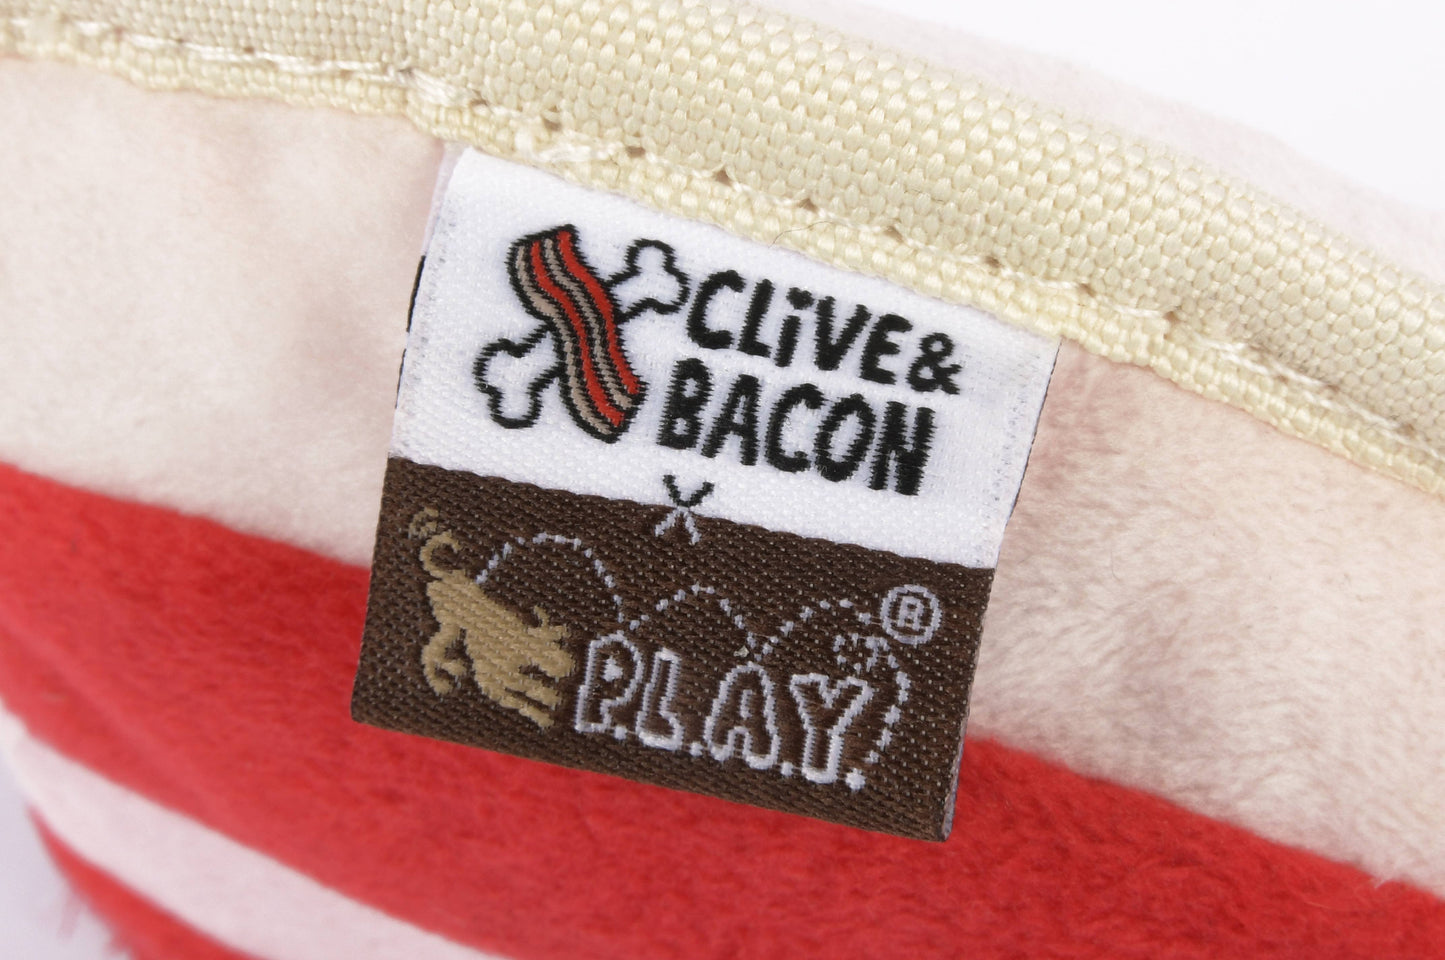 Bacon Squeaky Dog Toy